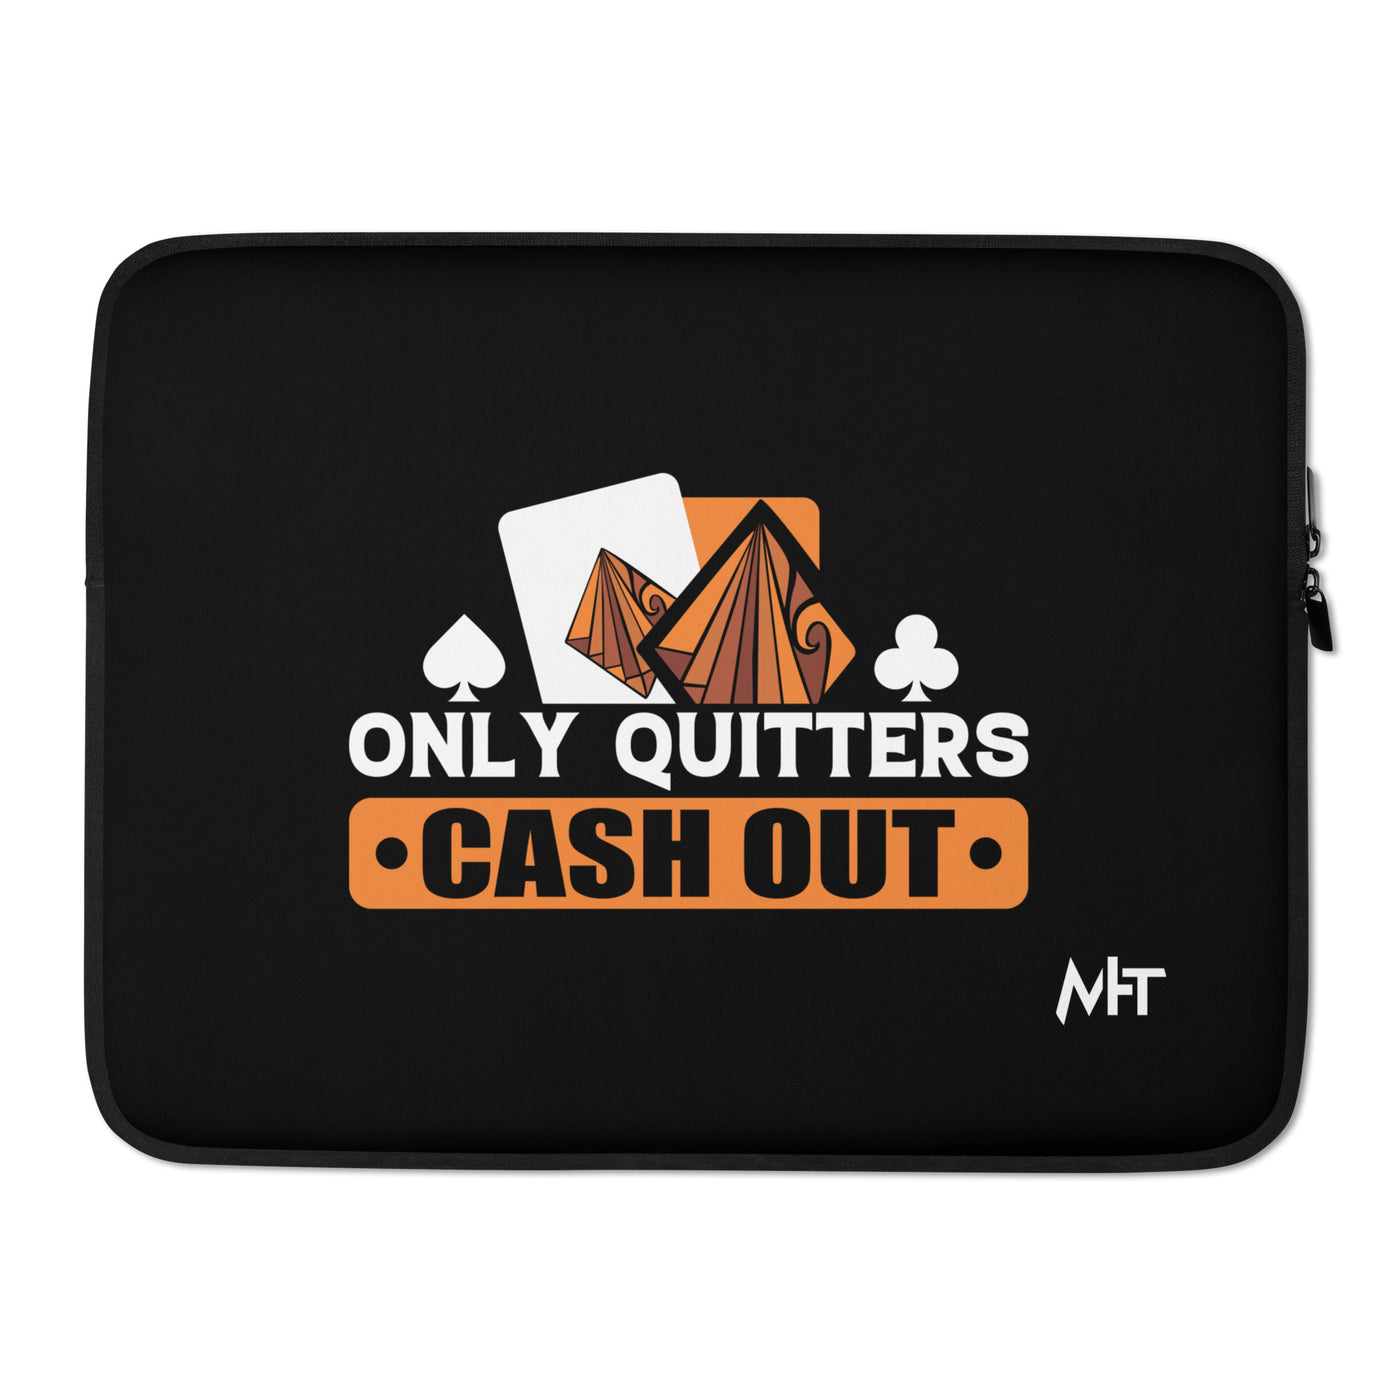 Only Quitters Cash Out - Laptop Sleeve